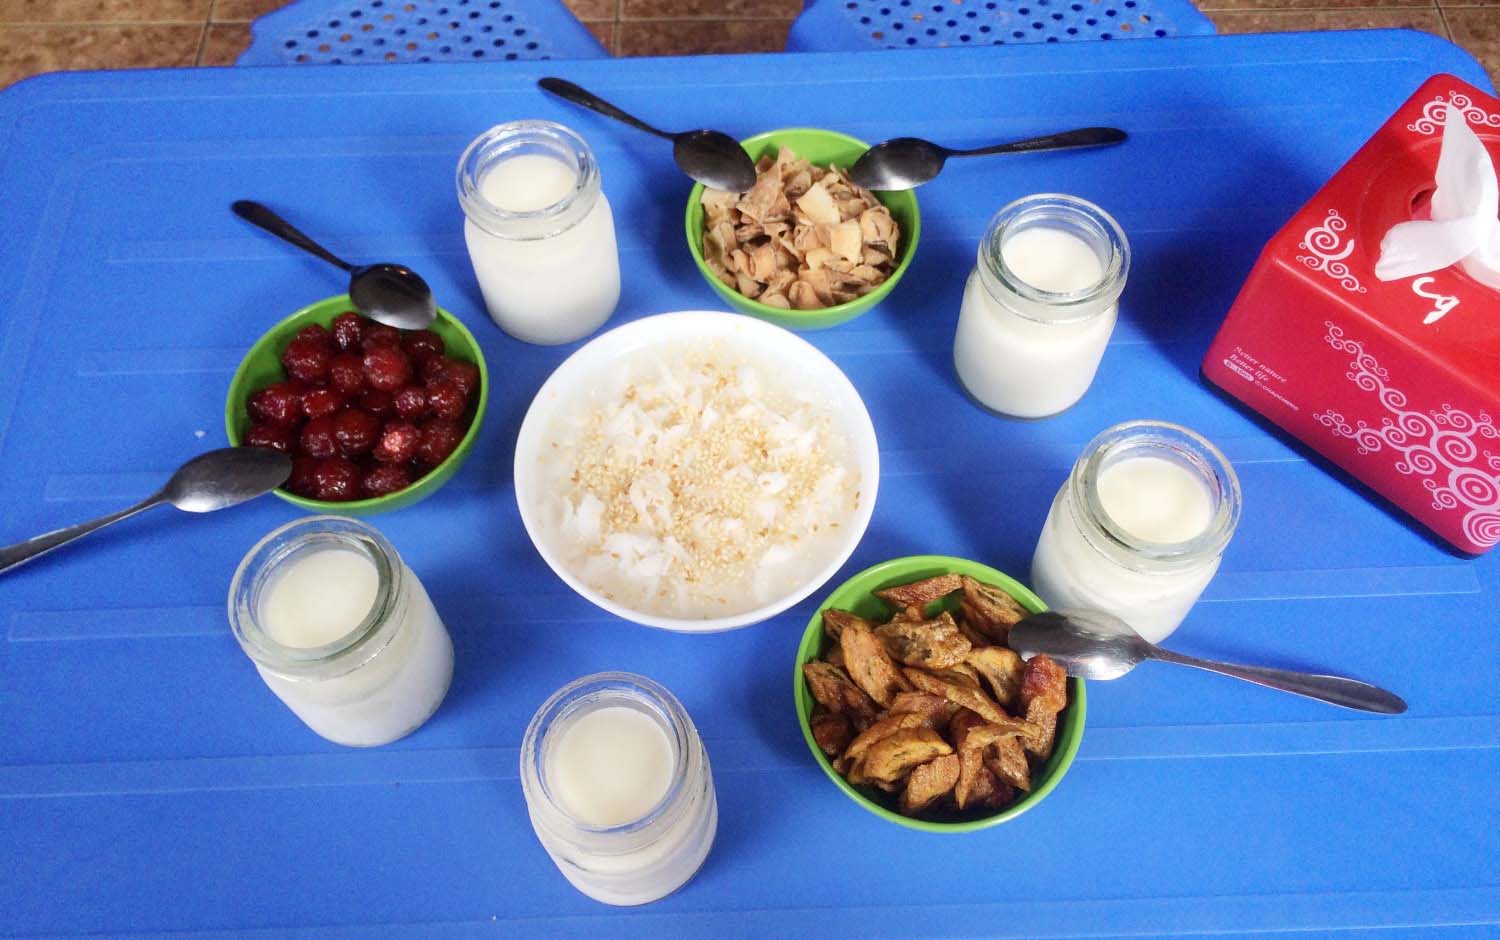 Coming to Ha Long, there is a must-try snack - did you know?  - Photo 6.